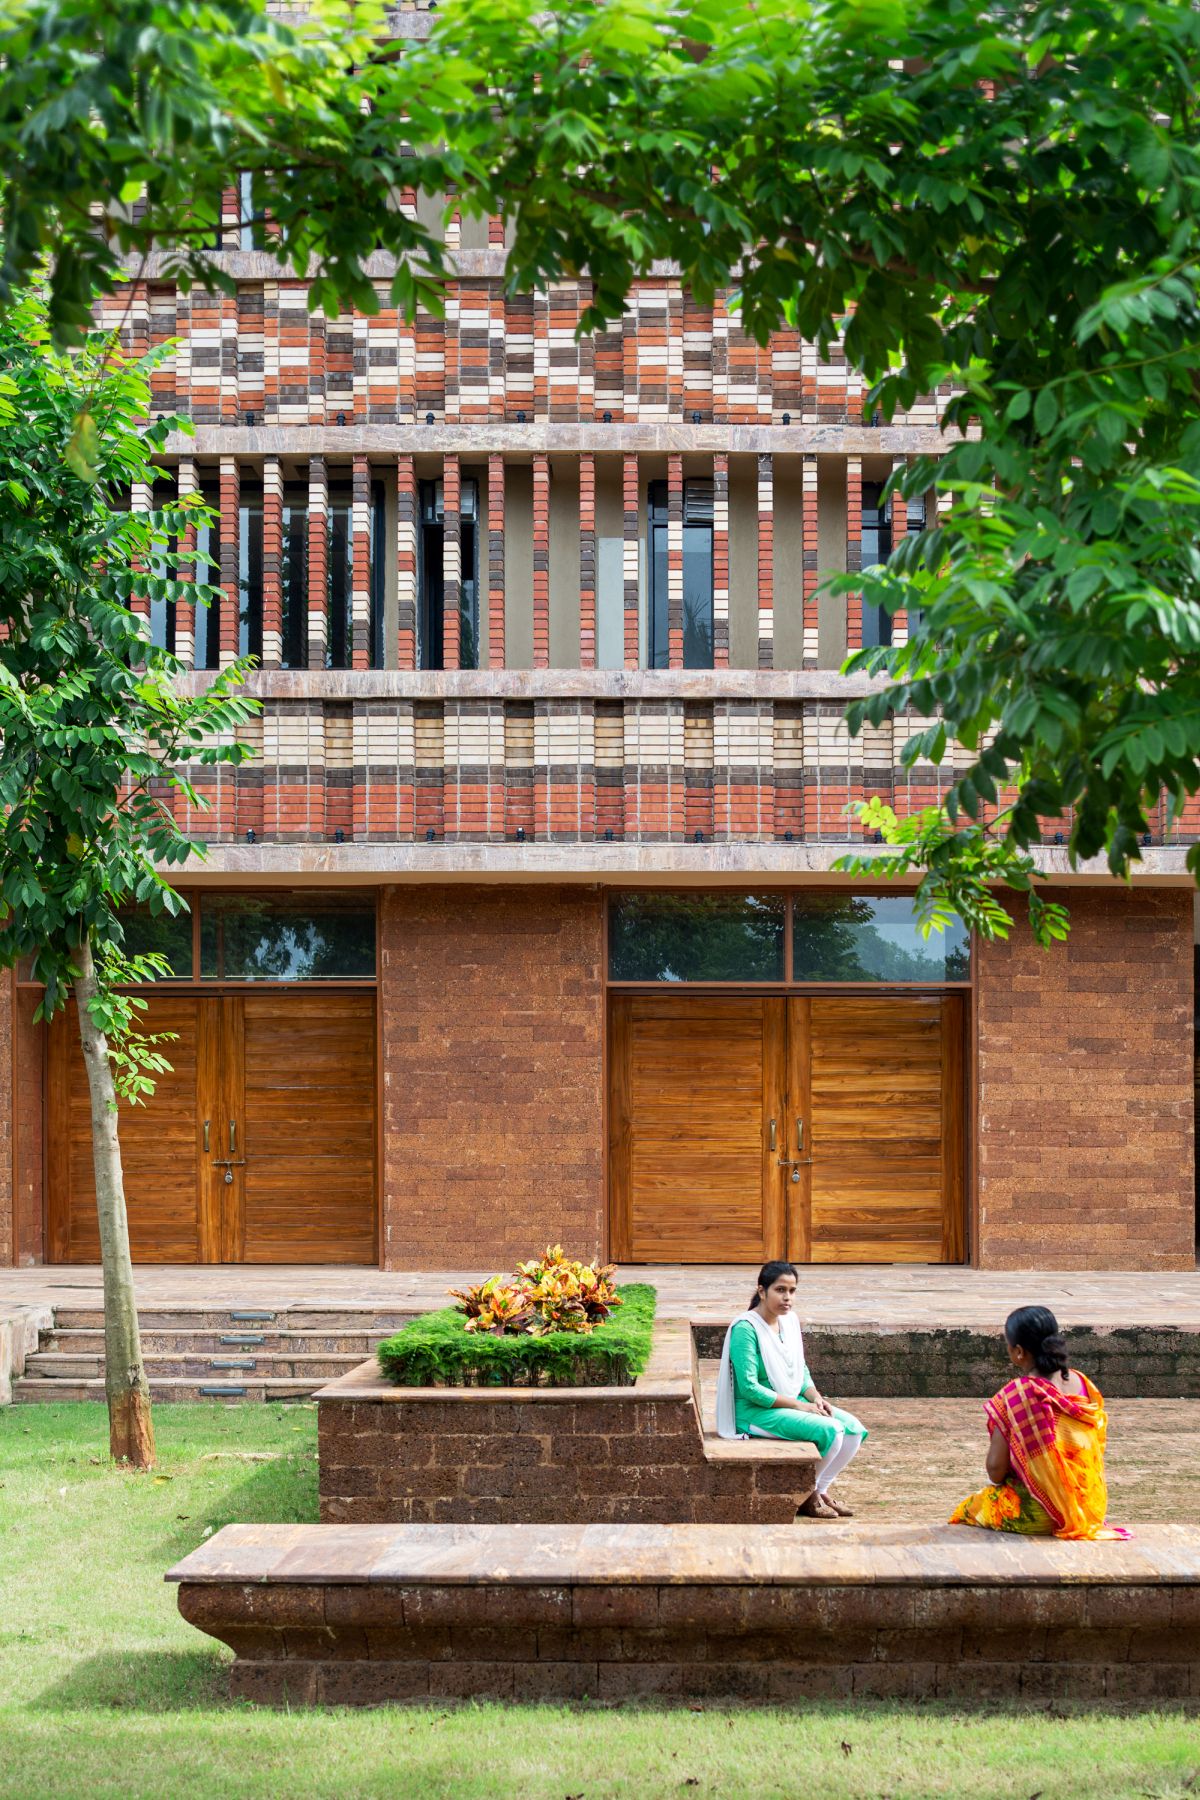 Krushi Bhawan | 150 Local Artisans Come Together to Craft a Civic Building in India, by Studio Lotus 5